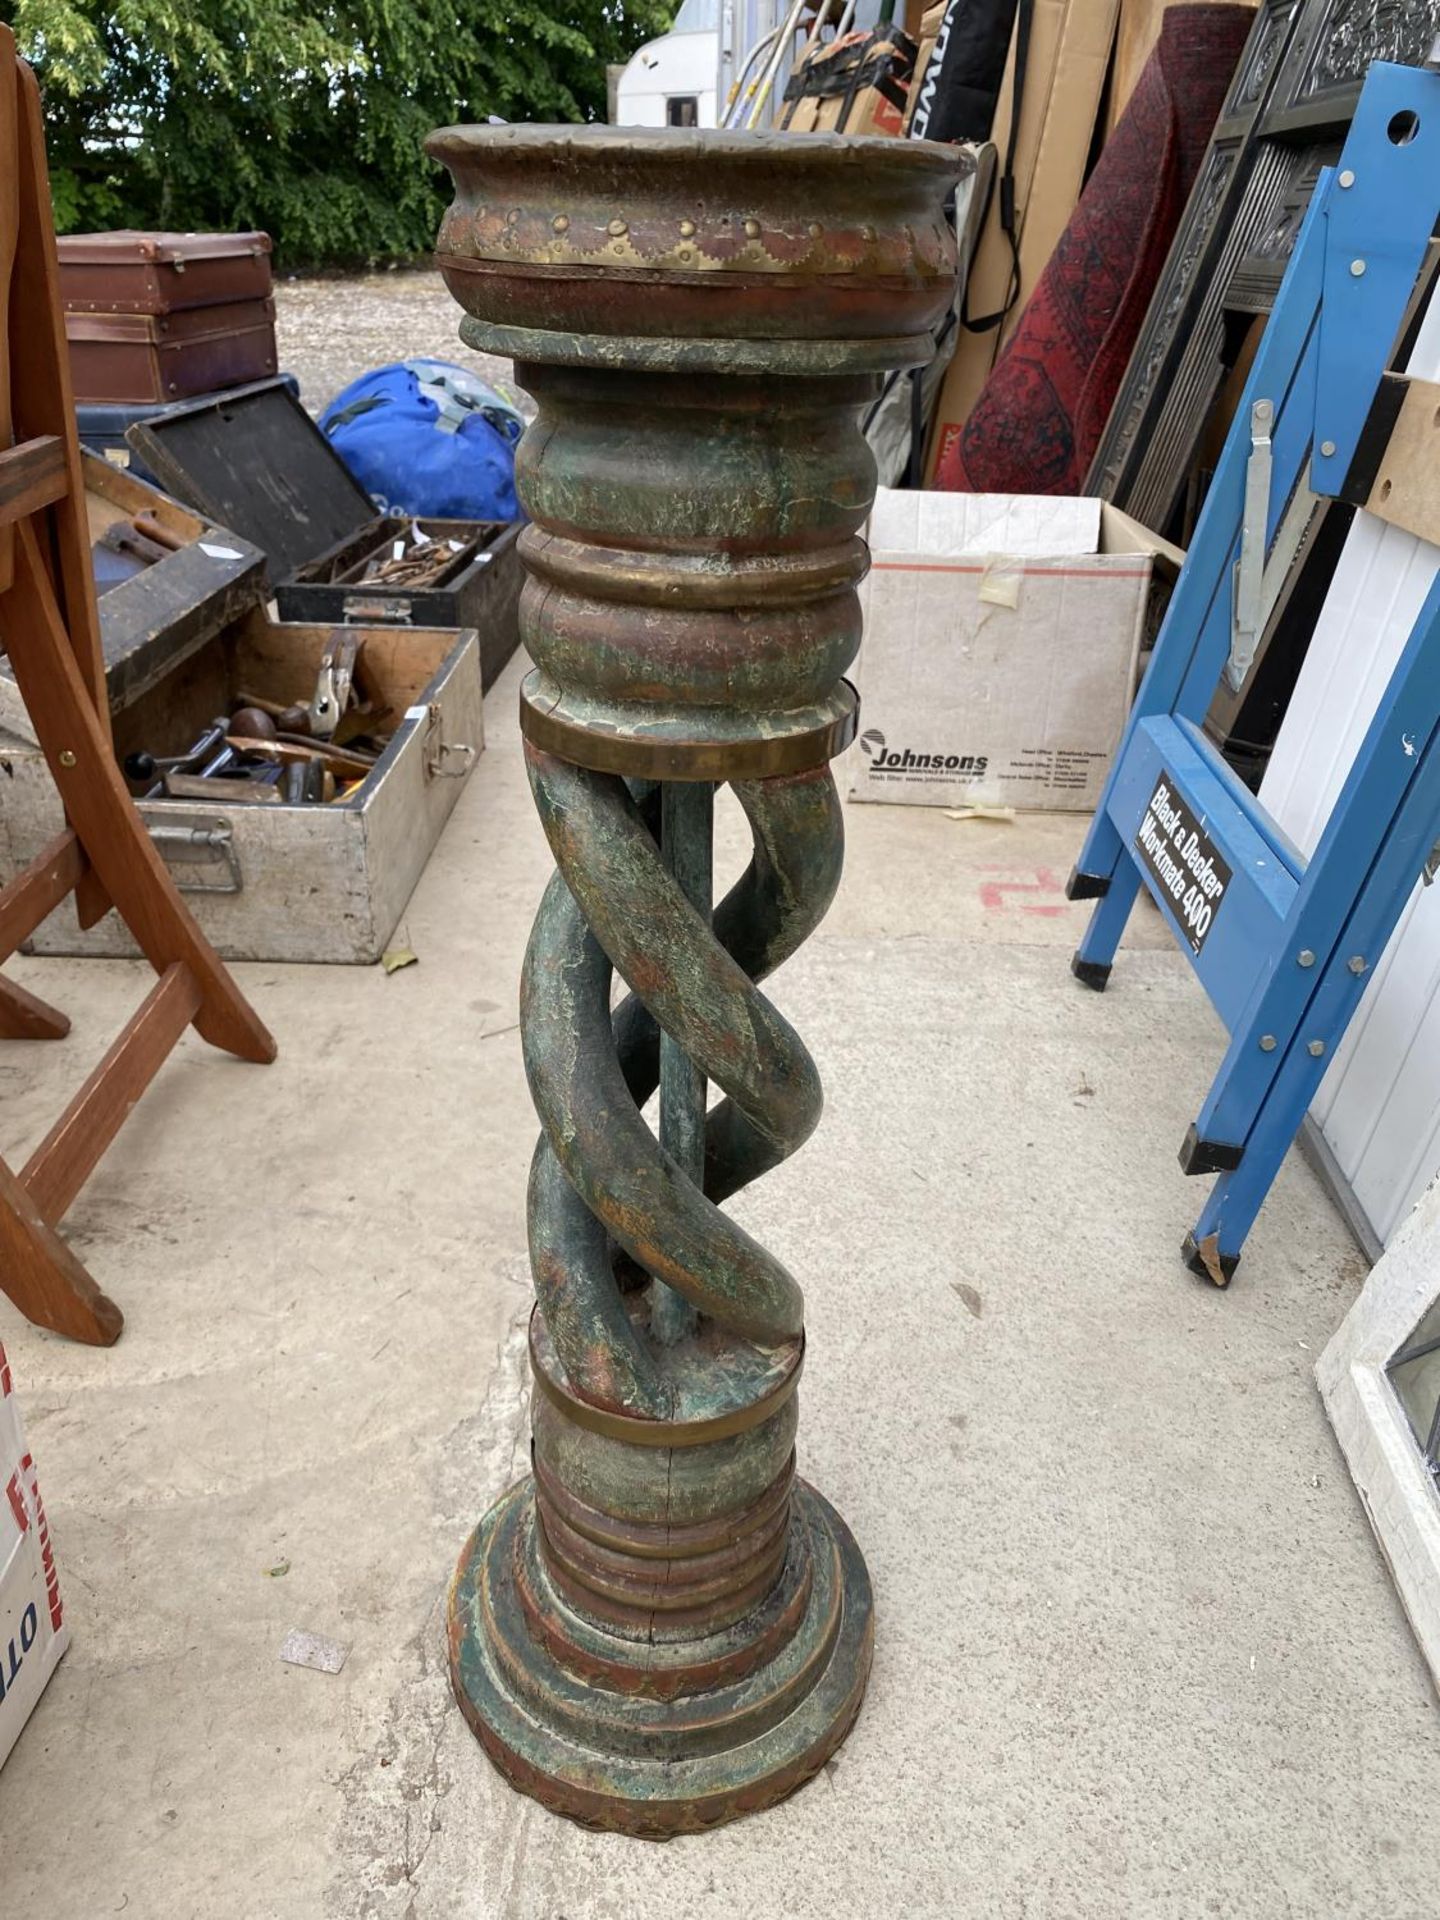 A WOODEN PEDESTAL PLANT STAND - Image 3 of 12